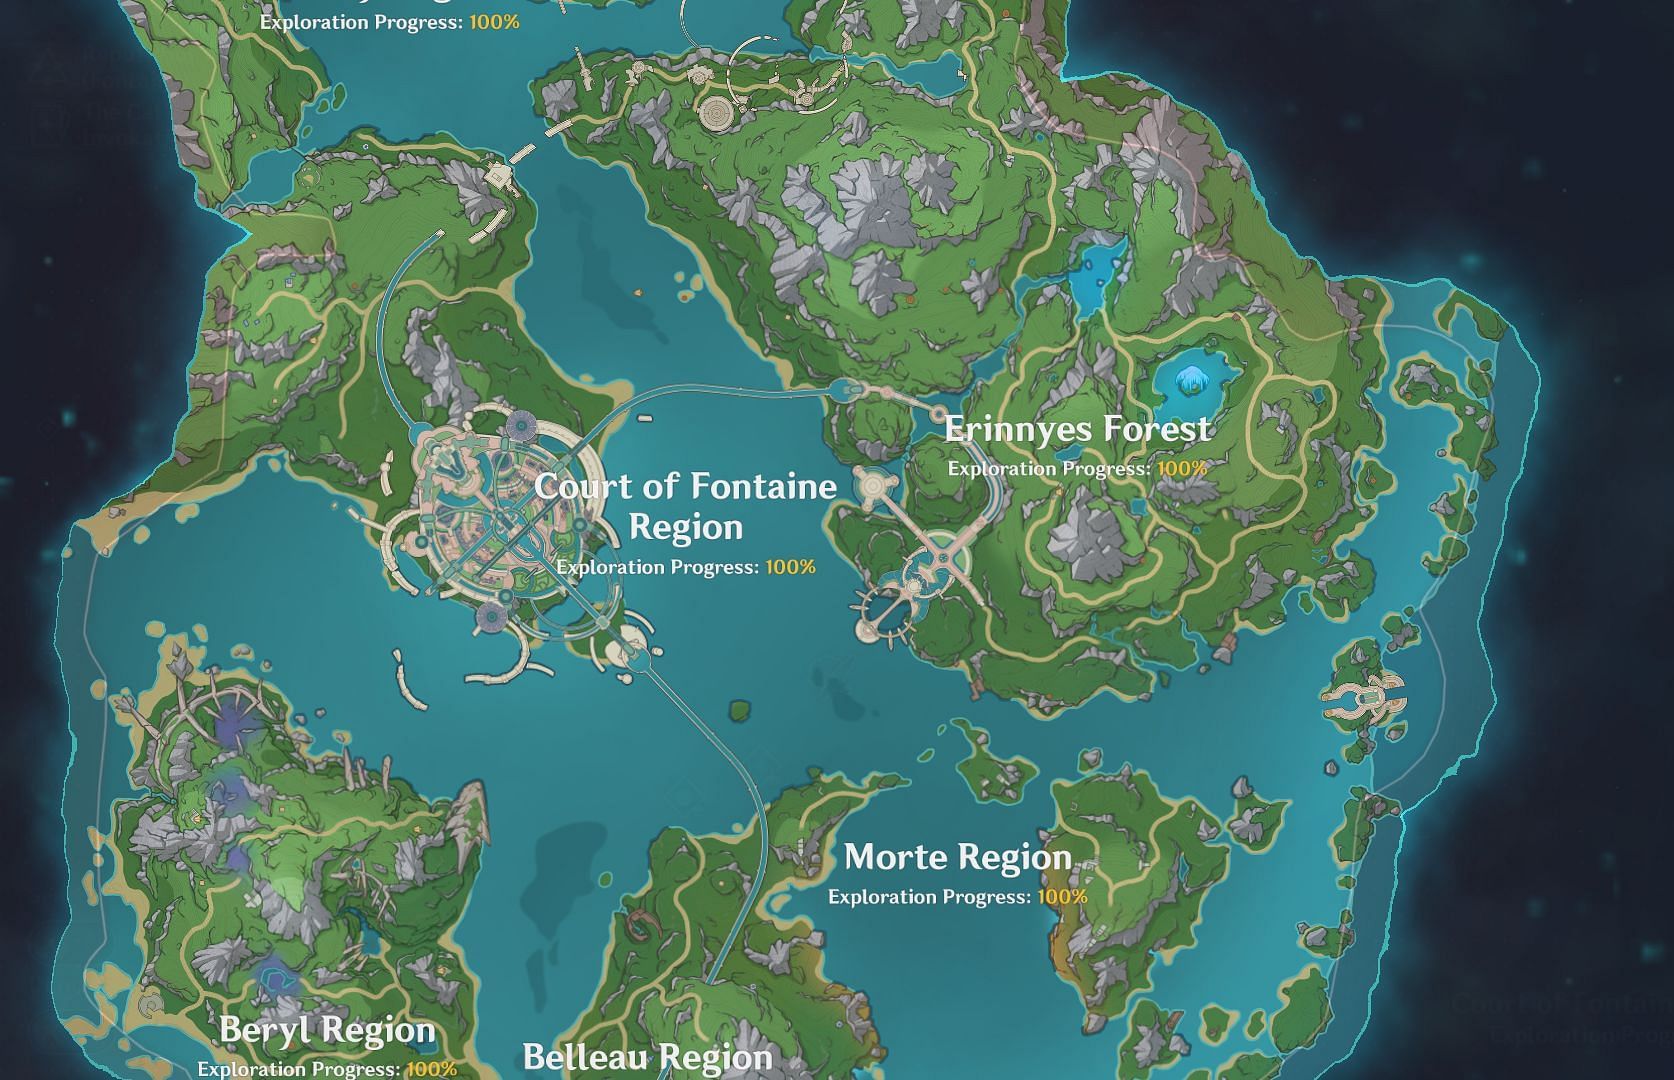 How to get 100% exploration in Morte Region and Erinnyes Forest (Image via HoYoverse)